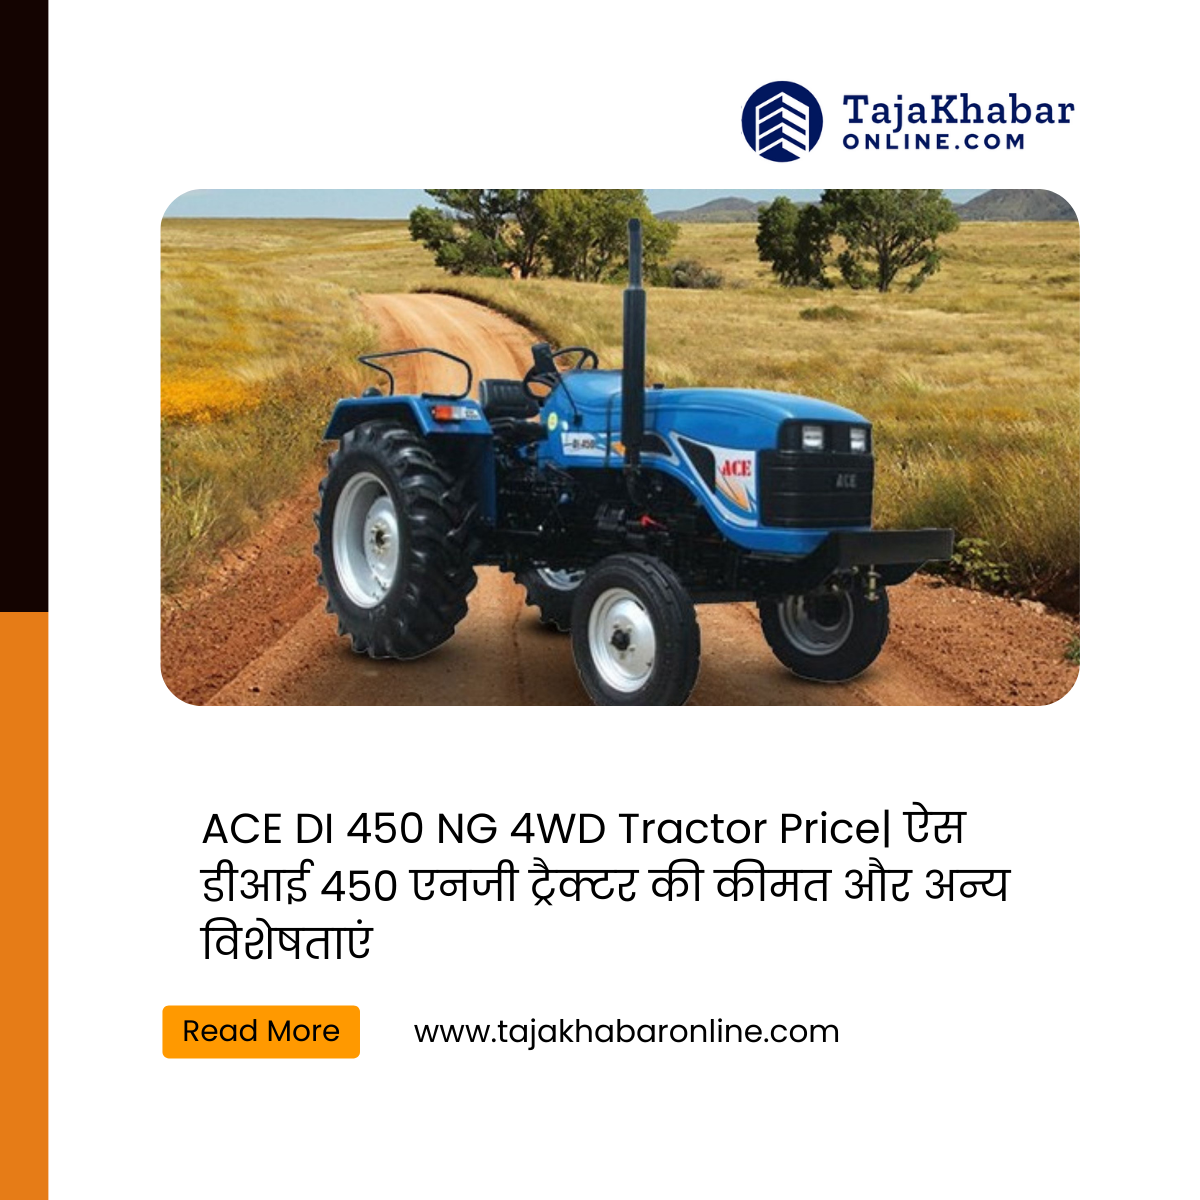 ACE DI 450 NG 4WD Tractor Price|